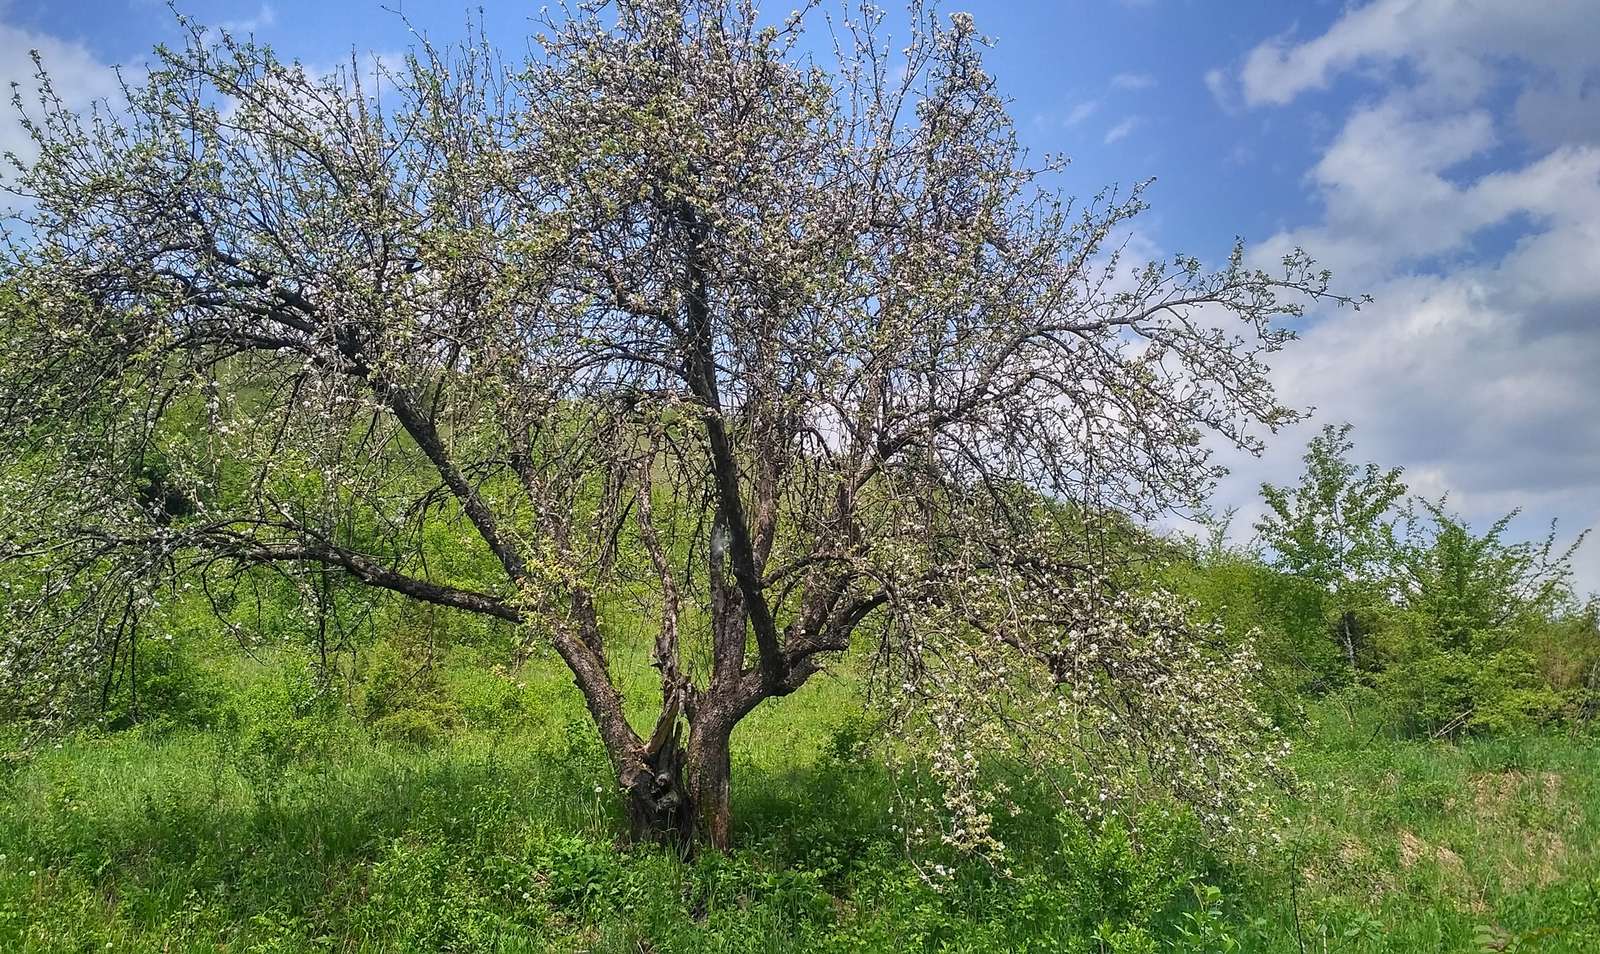 Tree in bloom jigsaw puzzle online